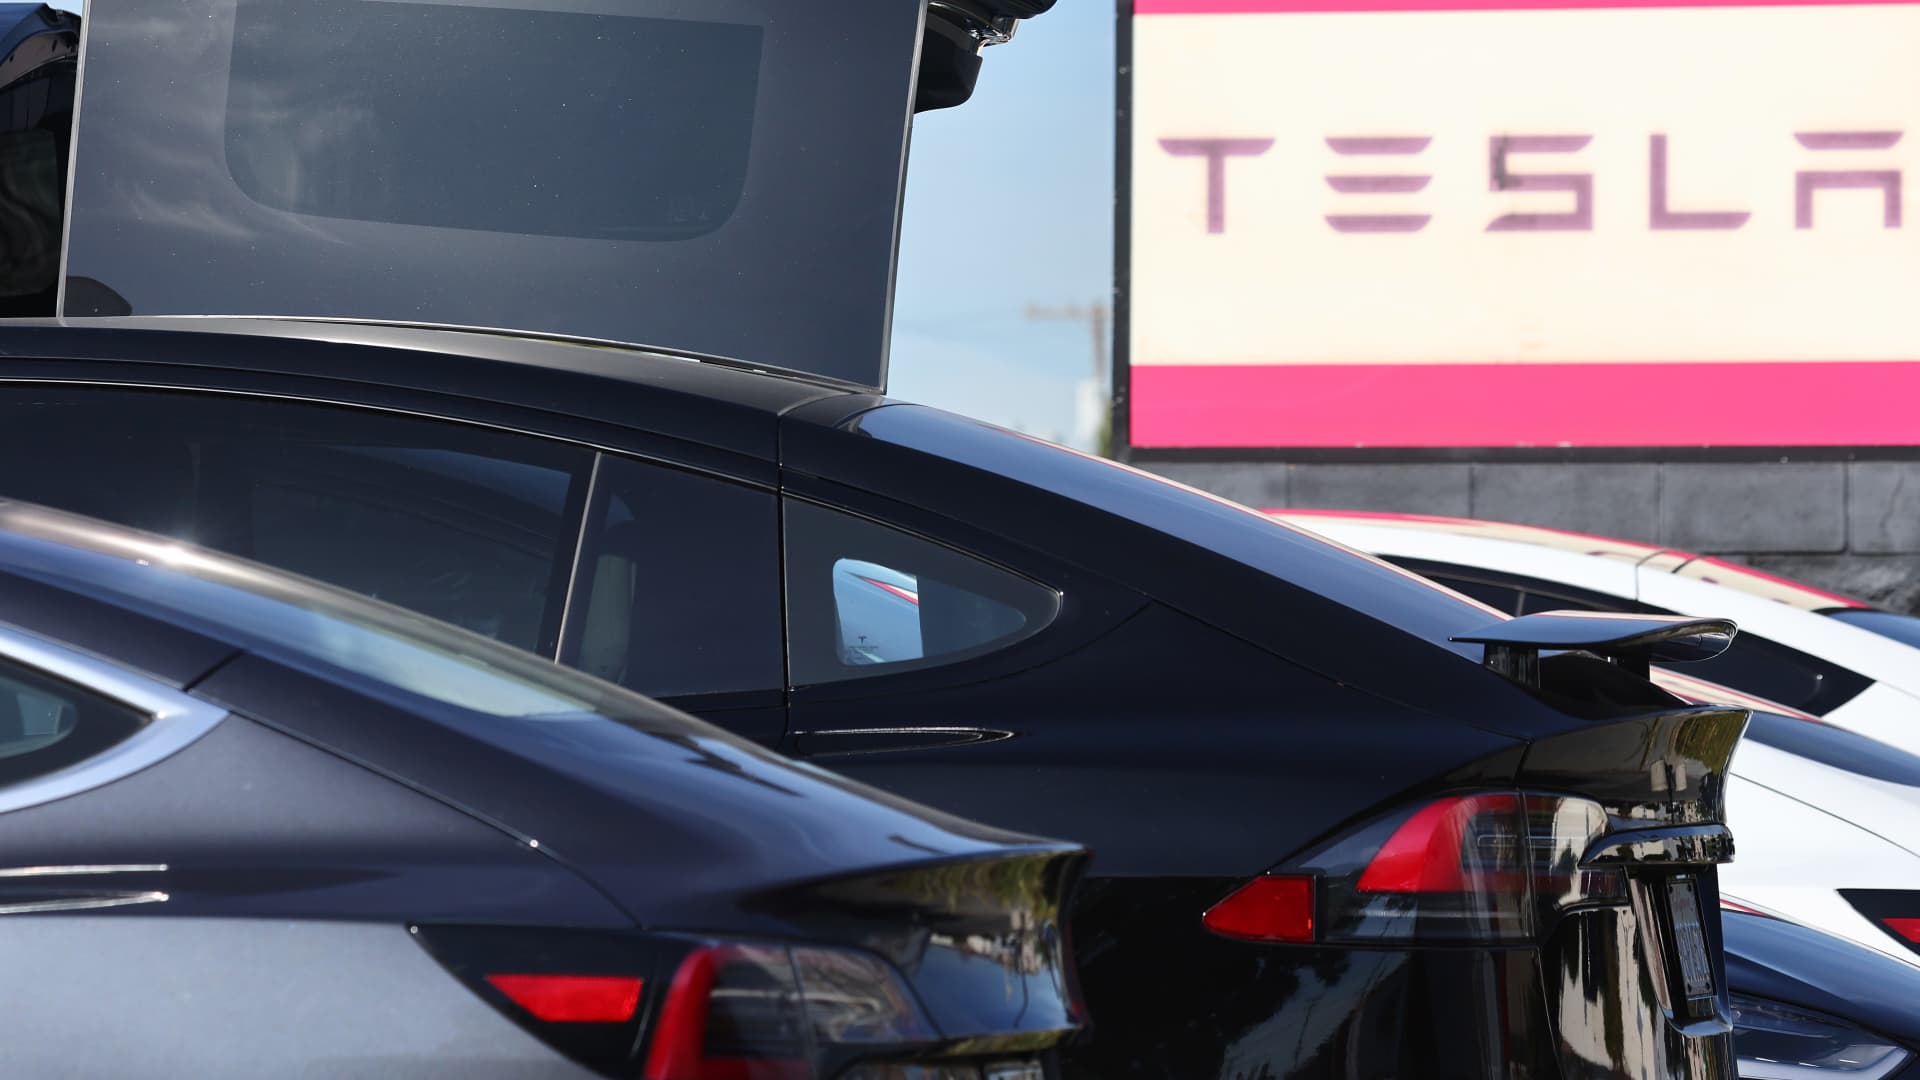 Tesla recalls nearly 200,000 vehicles in the U.S. over rearview camera bug